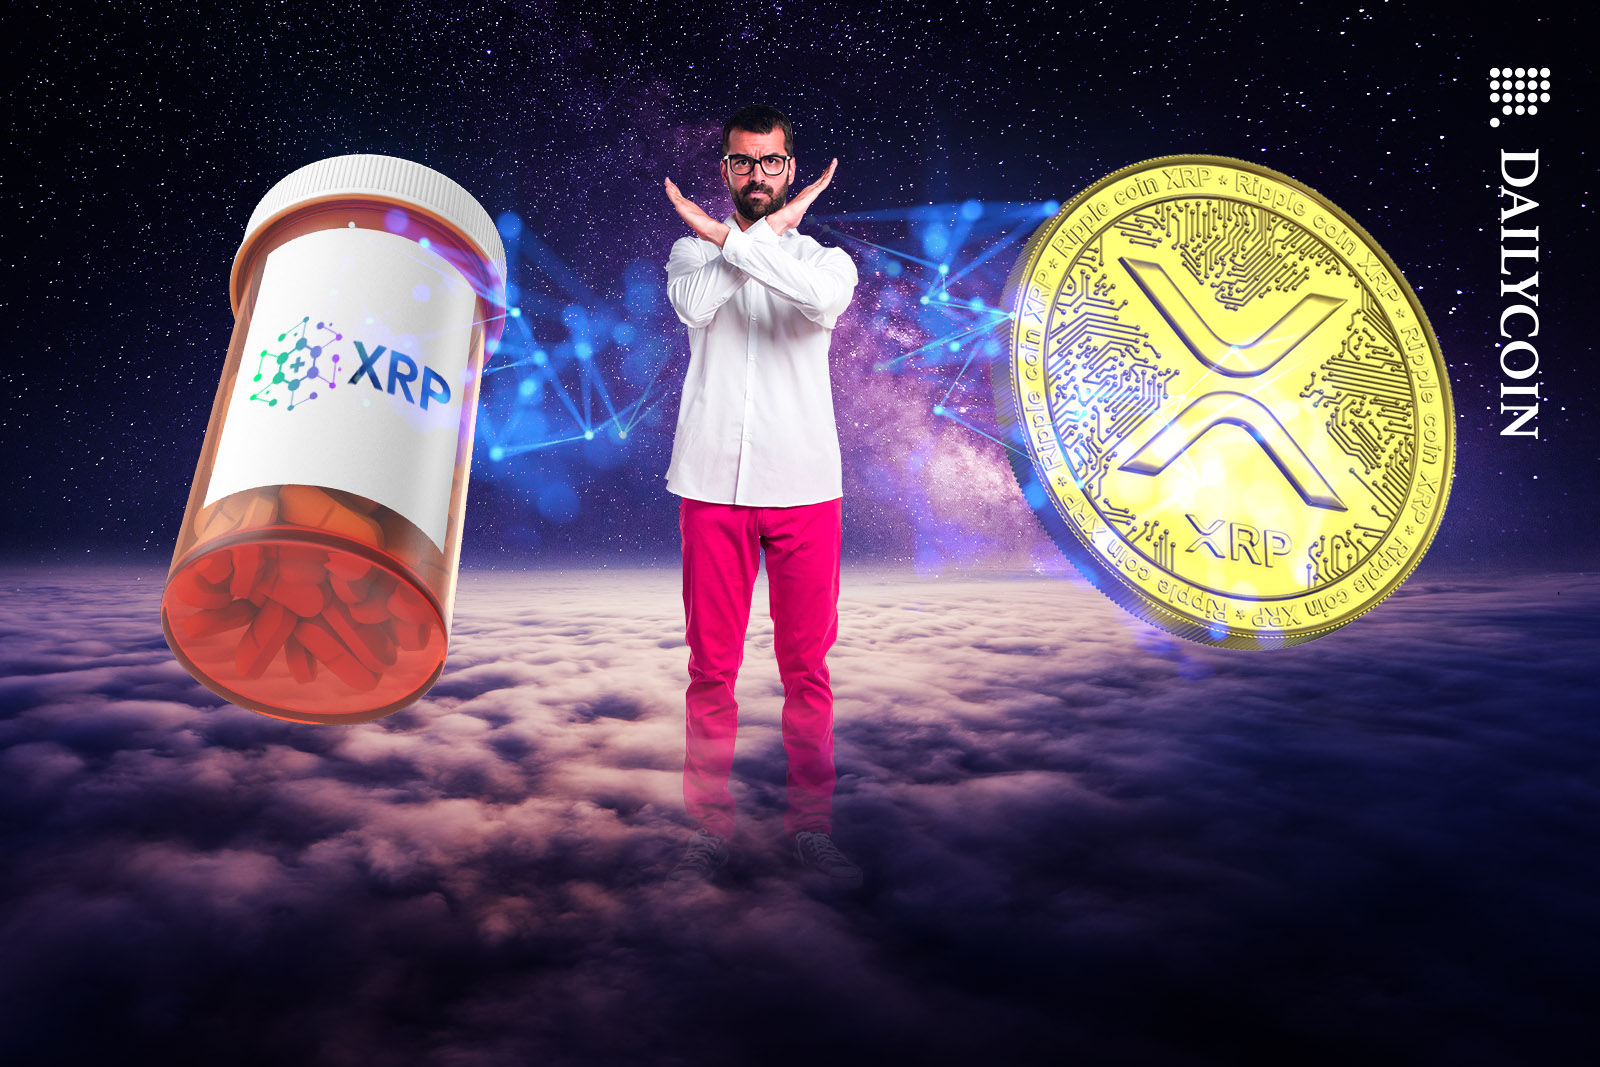 Man stopping the transaction between a XRPH pills and XRP coins whilst standing on clouds.